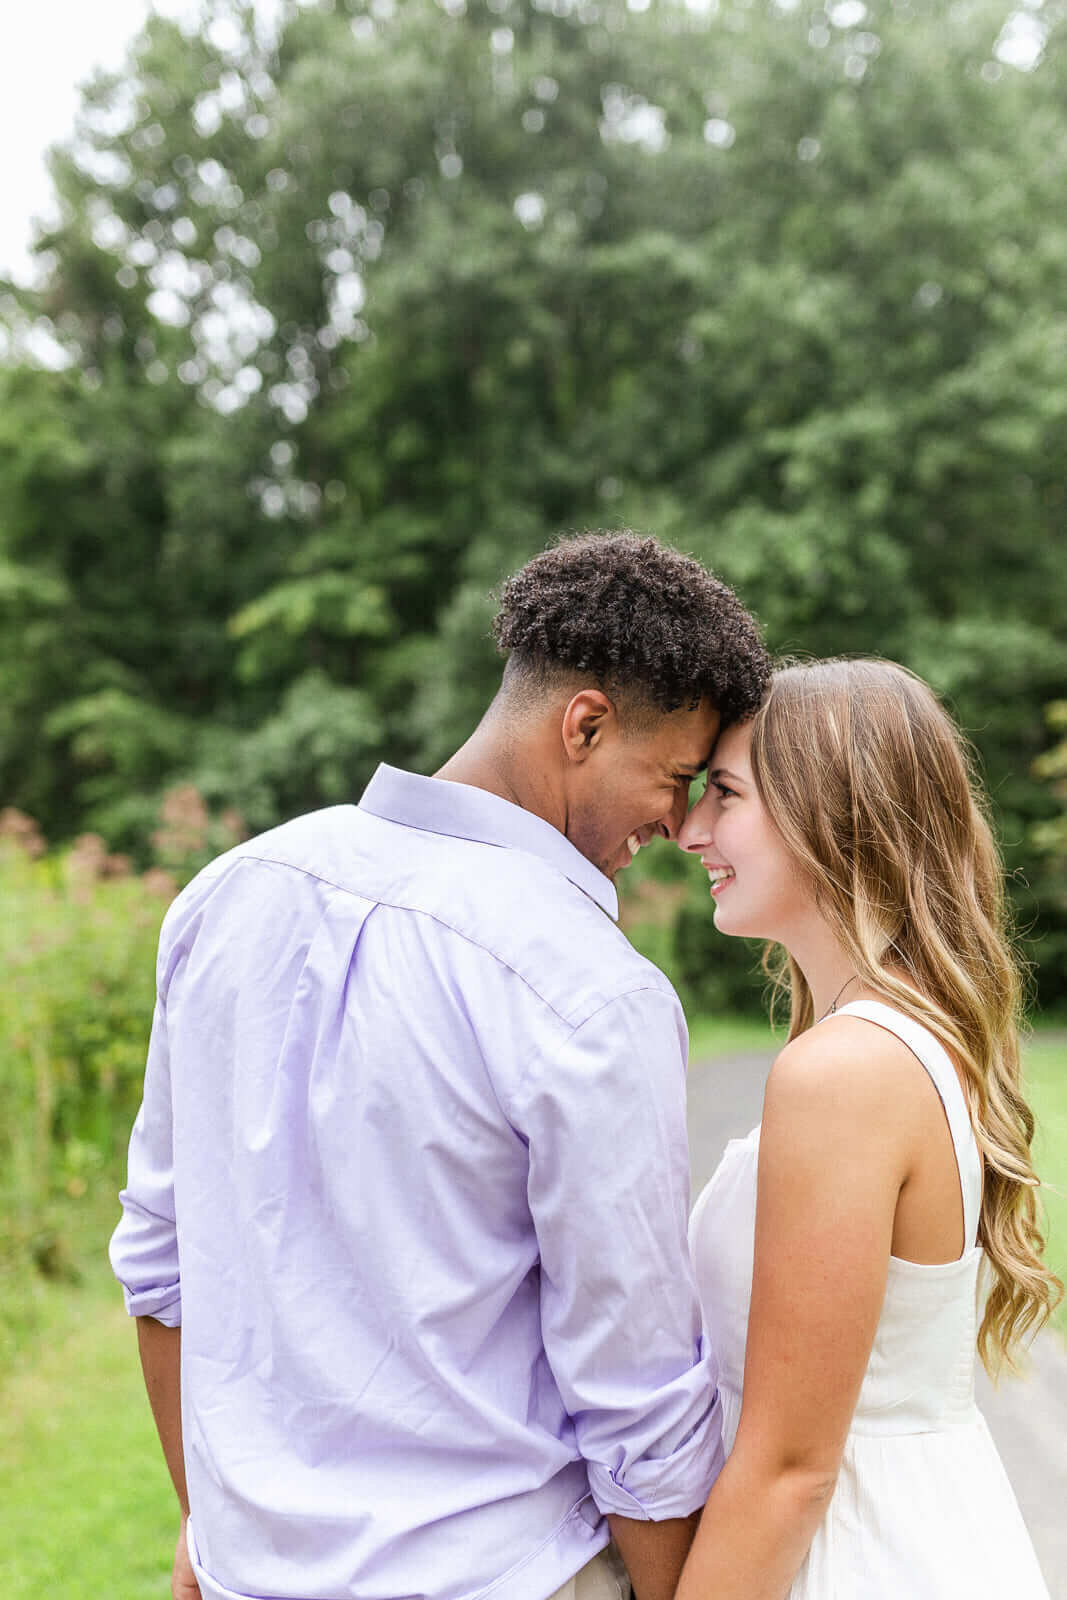 5-kara-loryn-photography-engaged-couple-gazing-into-each-others-eyes